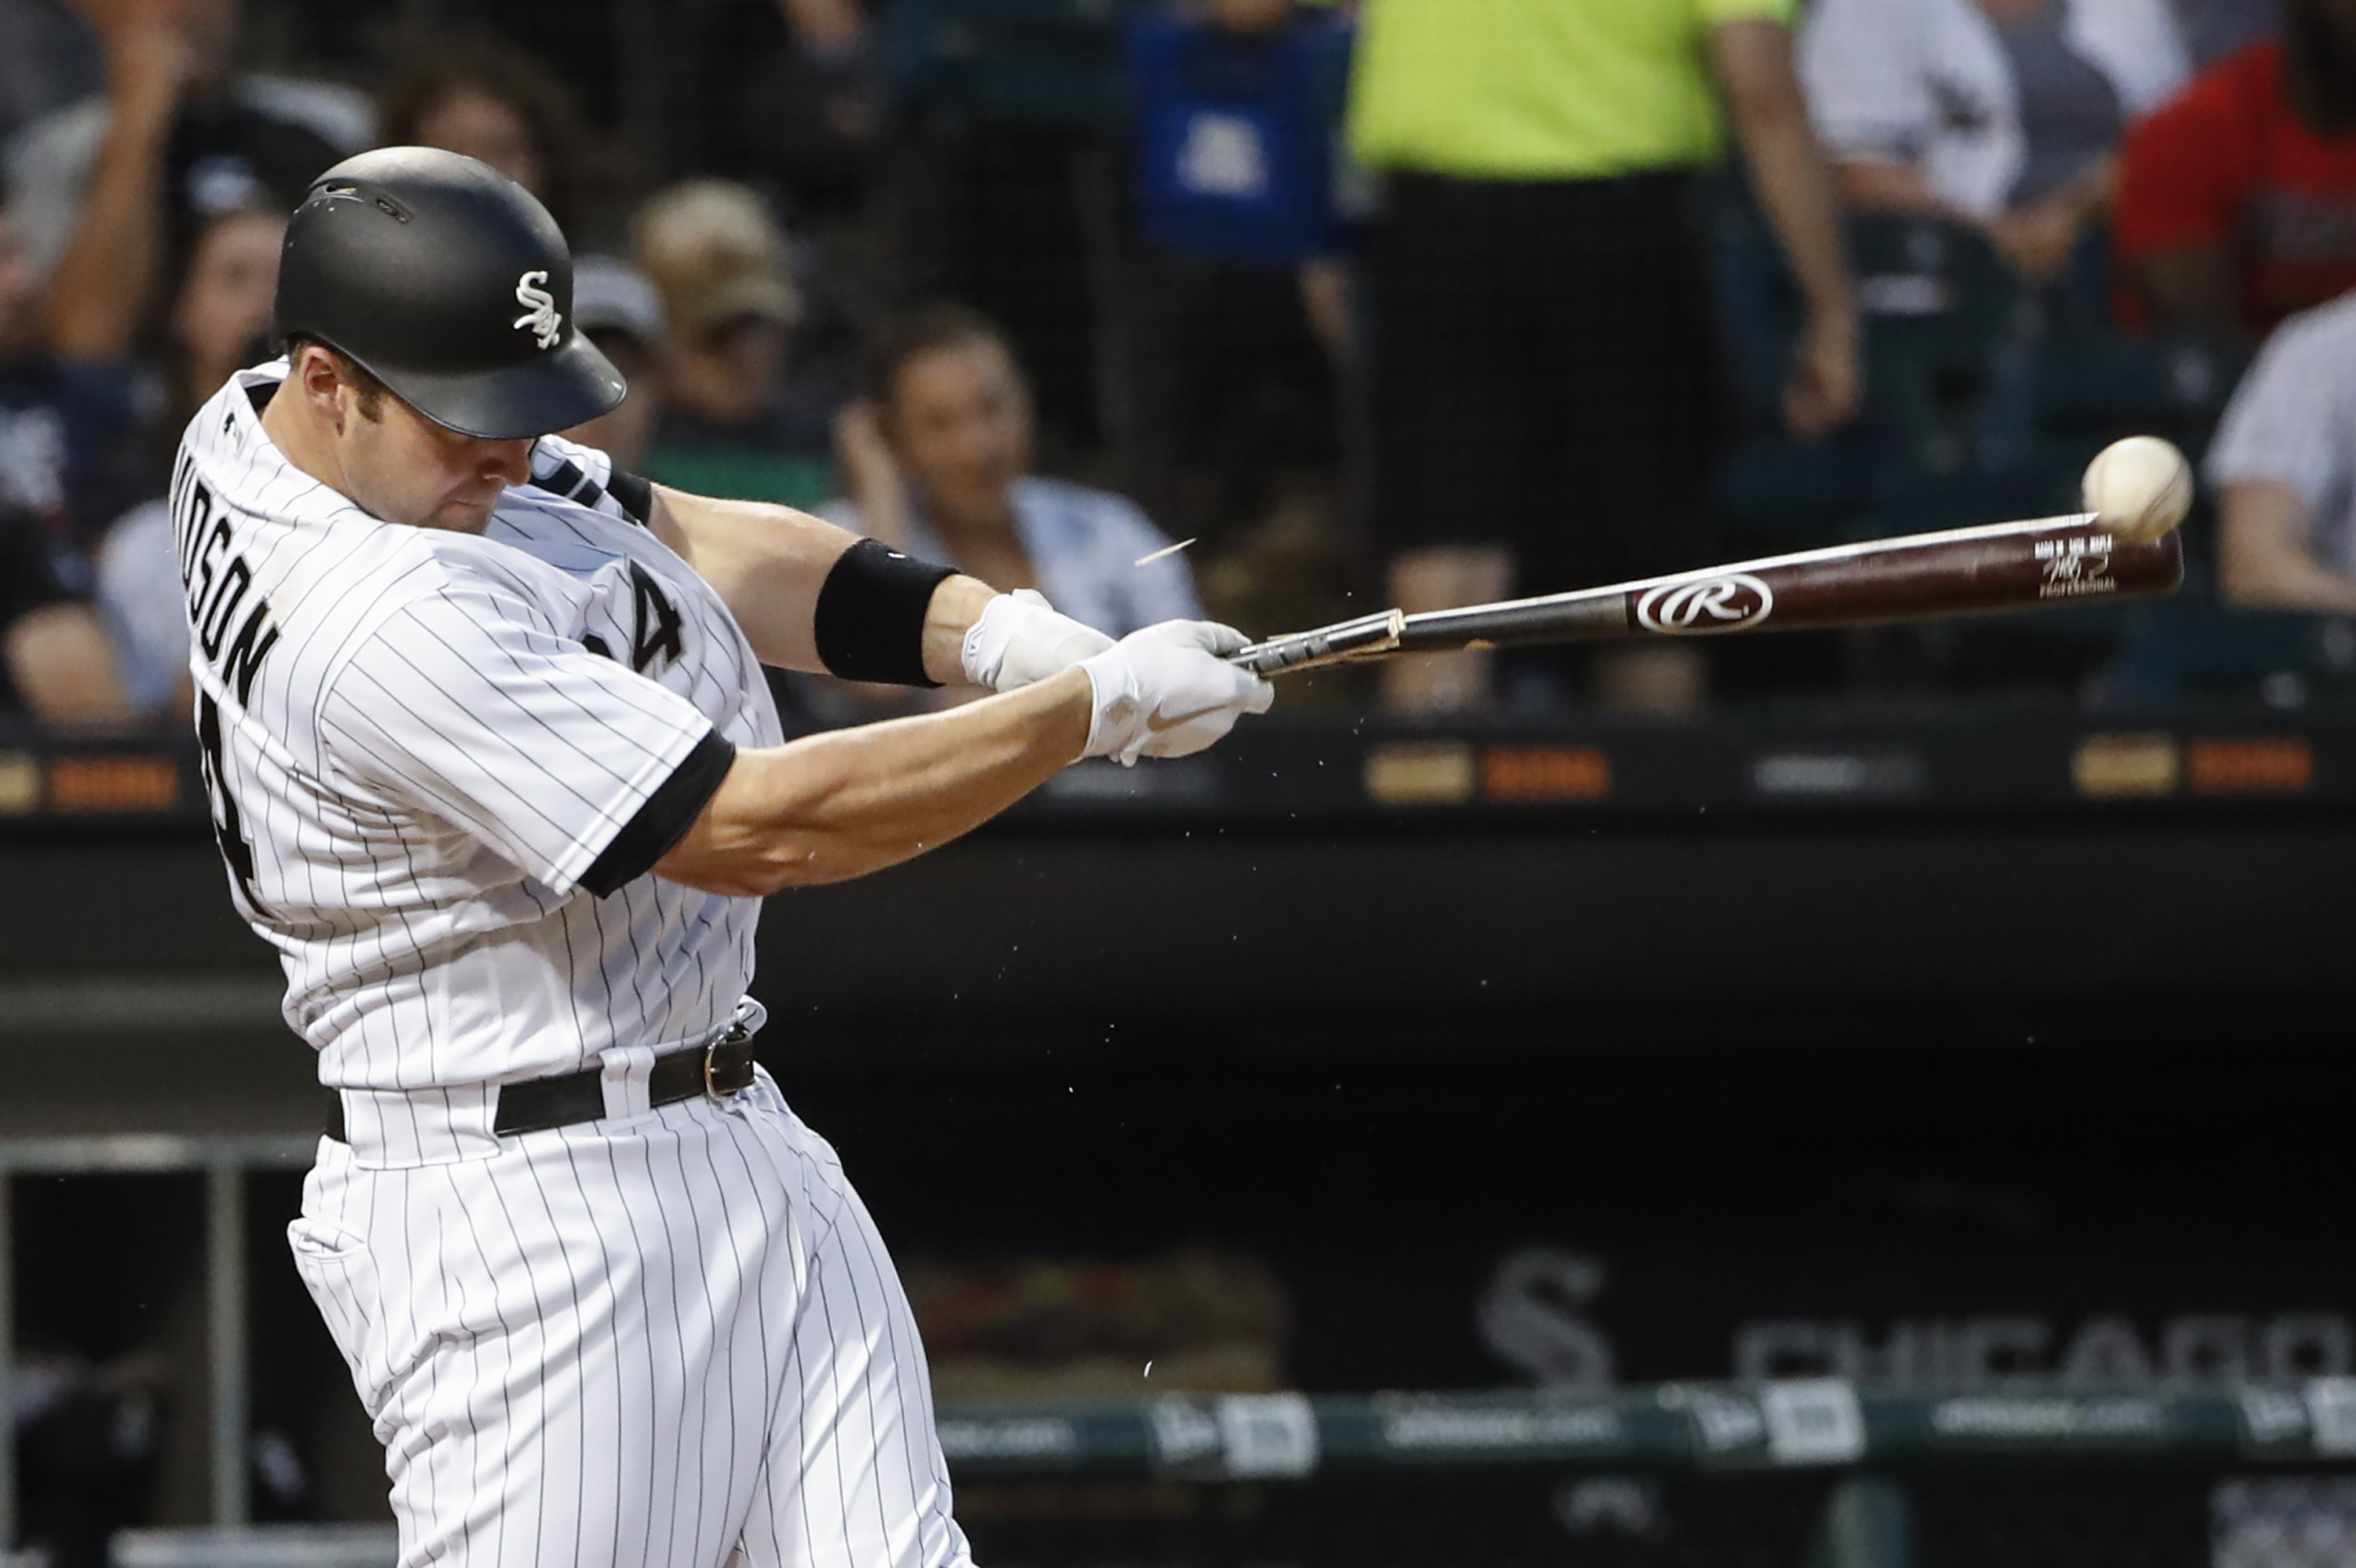 Jun 15, 2018; Chicago, IL, USA; Chicago White Sox designated hitter Matt Davidson (24) hits a single against the Detroit Tigers as he breaks hit bat during the fourth inning at Guaranteed Rate Field. Mandatory Credit: Kamil Krzaczynski-USA TODAY Sports